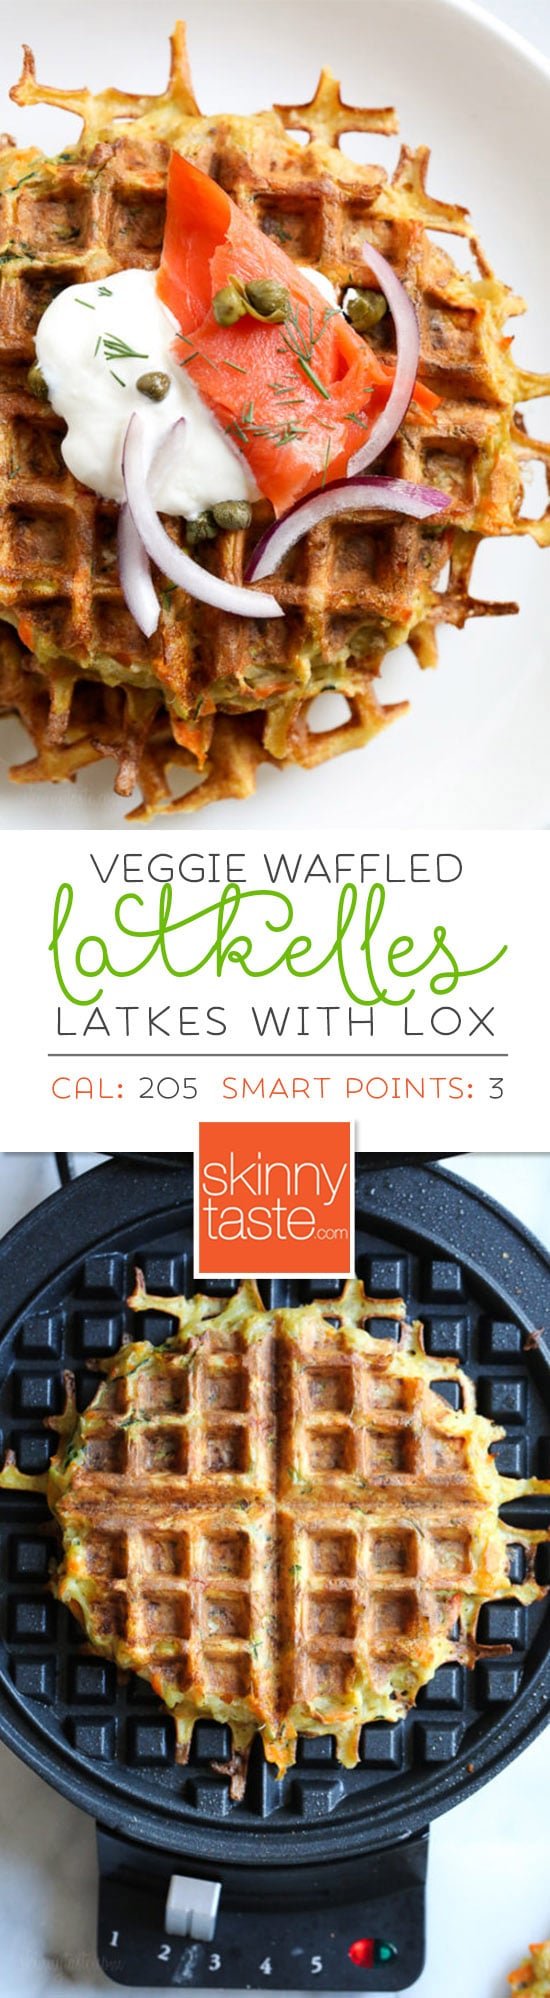 These veggie-packed latkes, are not your traditional latkes, they’re made with shredded potatoes and a mix of carrots, zucchini and bell pepper, PLUS they're cooked in a waffle iron so there’s no need to fry! What to serve with latkes is completely up to you, my favorite is with sour cream, lox, capers and red onion, or simply with apple sauce on the side. #latkes #hanukkah